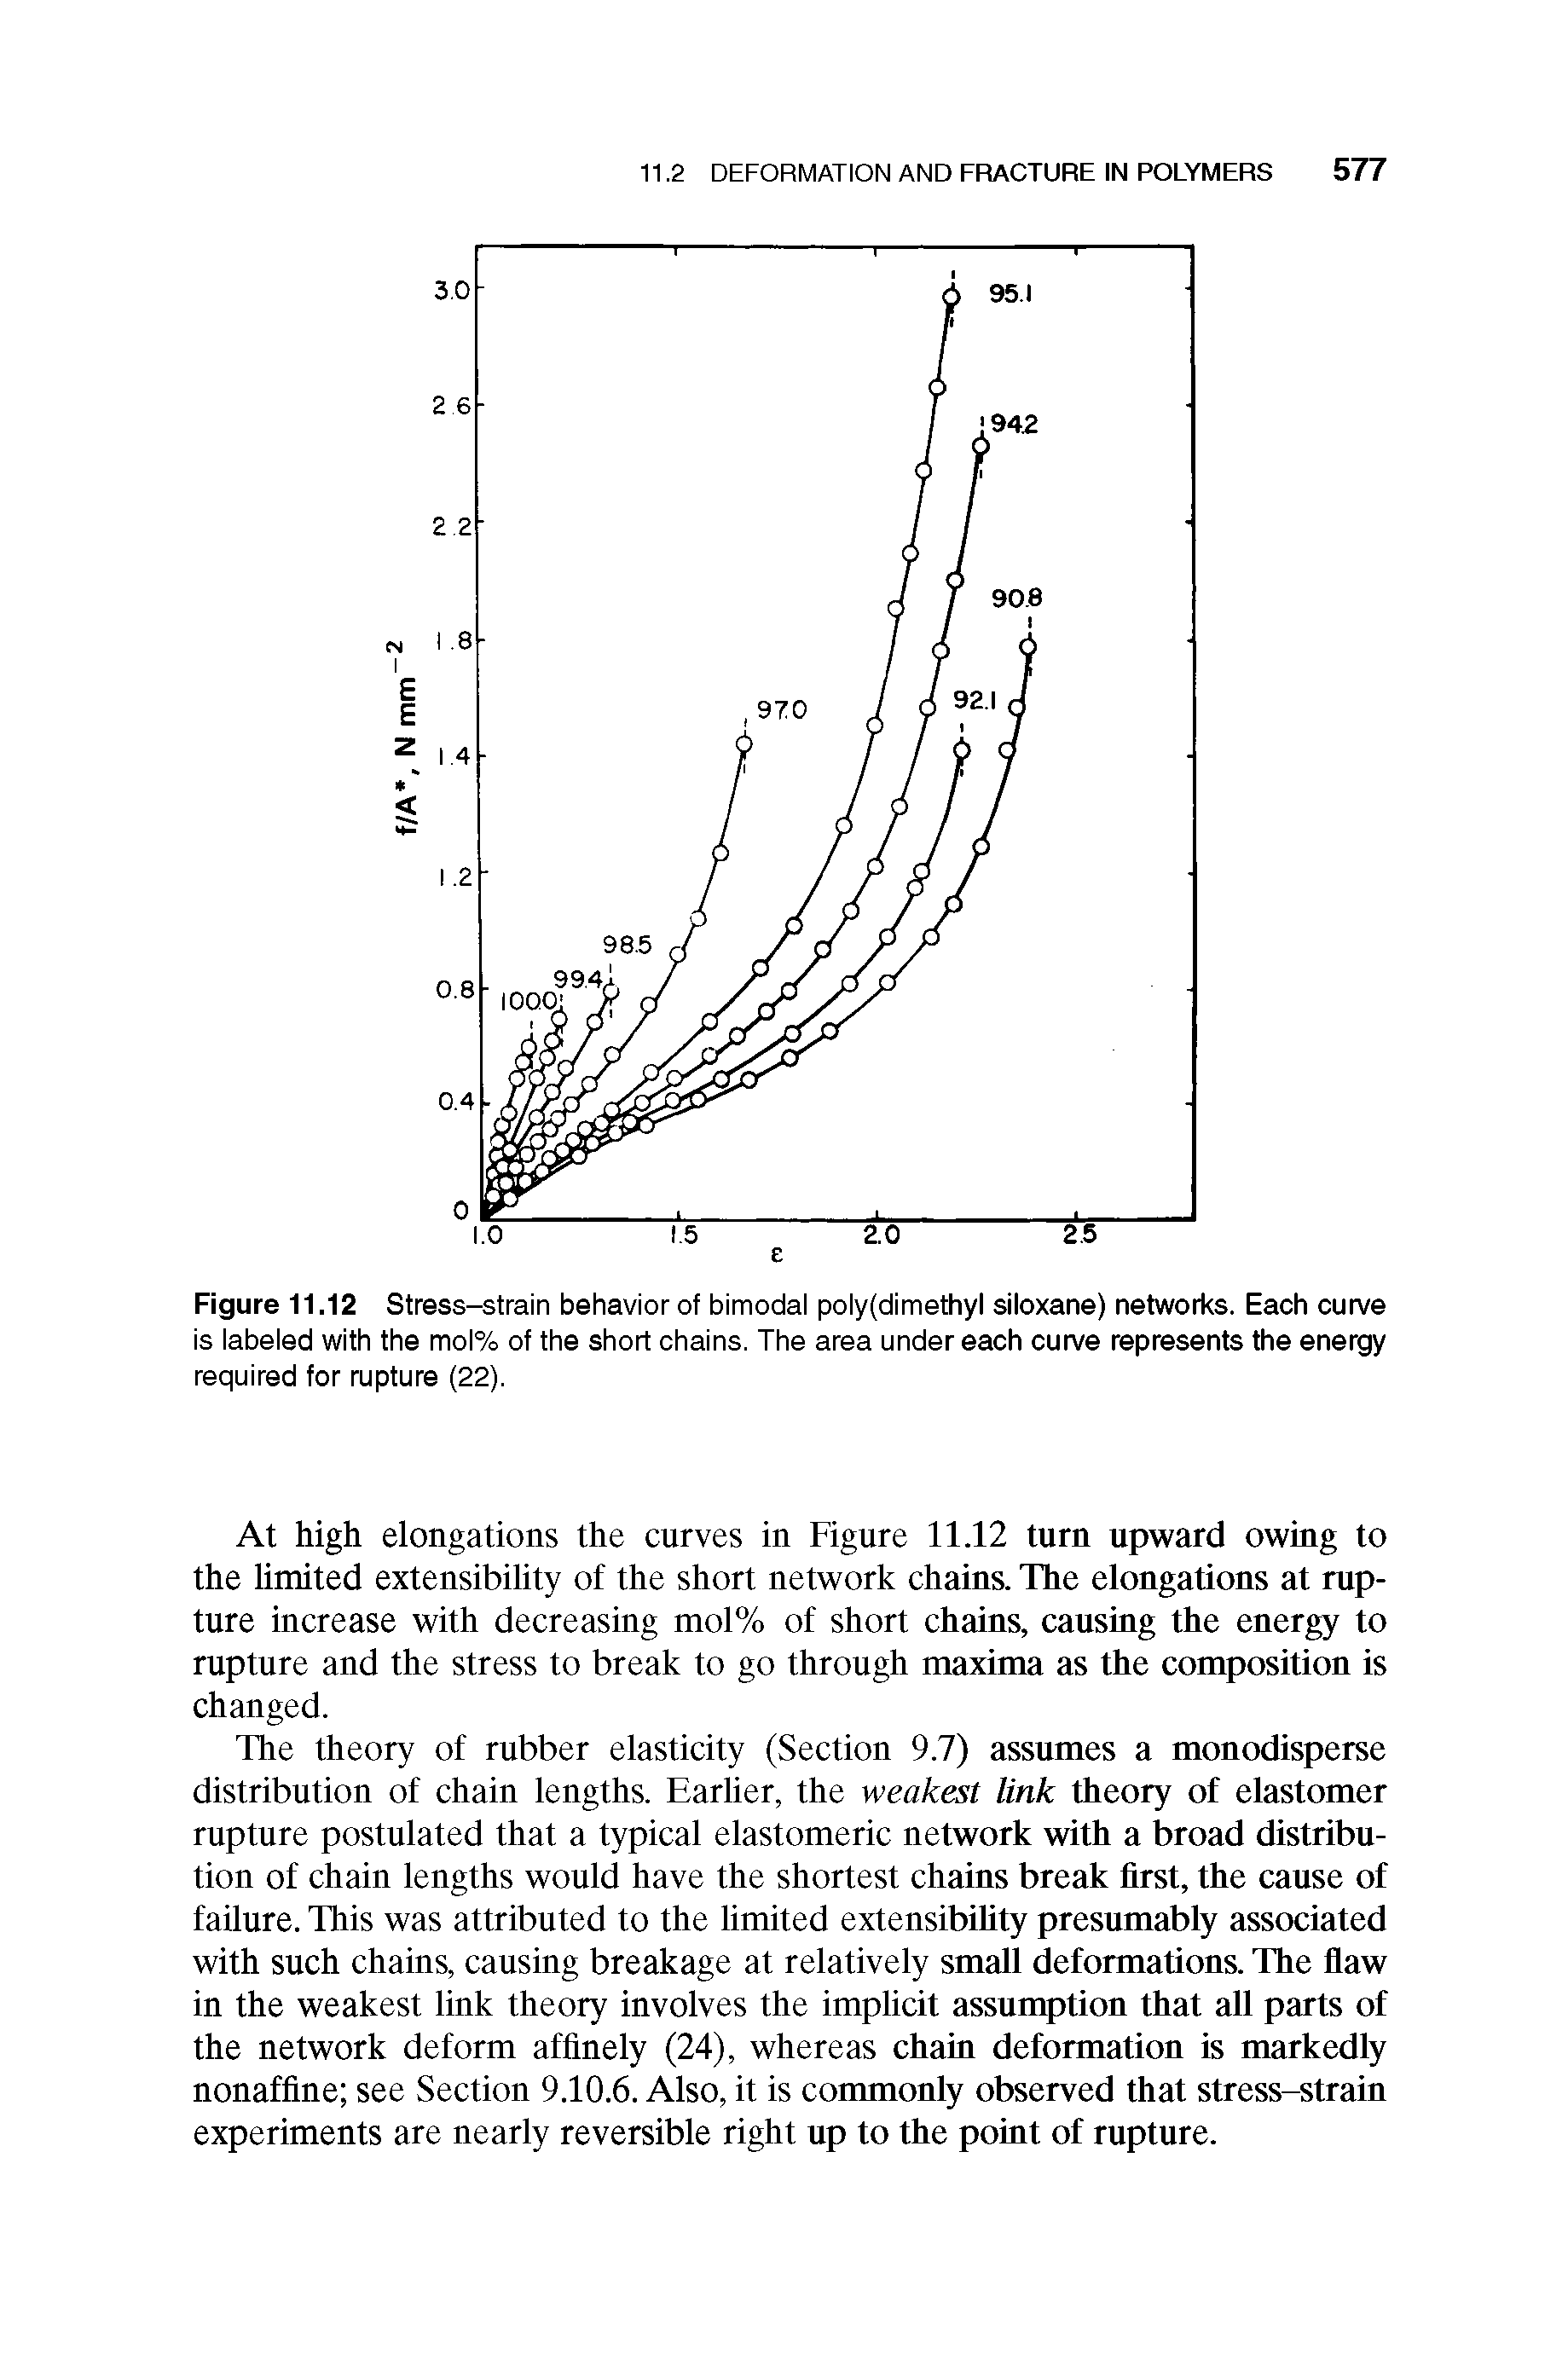 Figure 11.12 Stress-strain behavior of bimodal poly(dimethyl siloxane) networks. Each curve is labeled with the mol% of the short chains. The area under each curve represents the energy required for rupture (22).